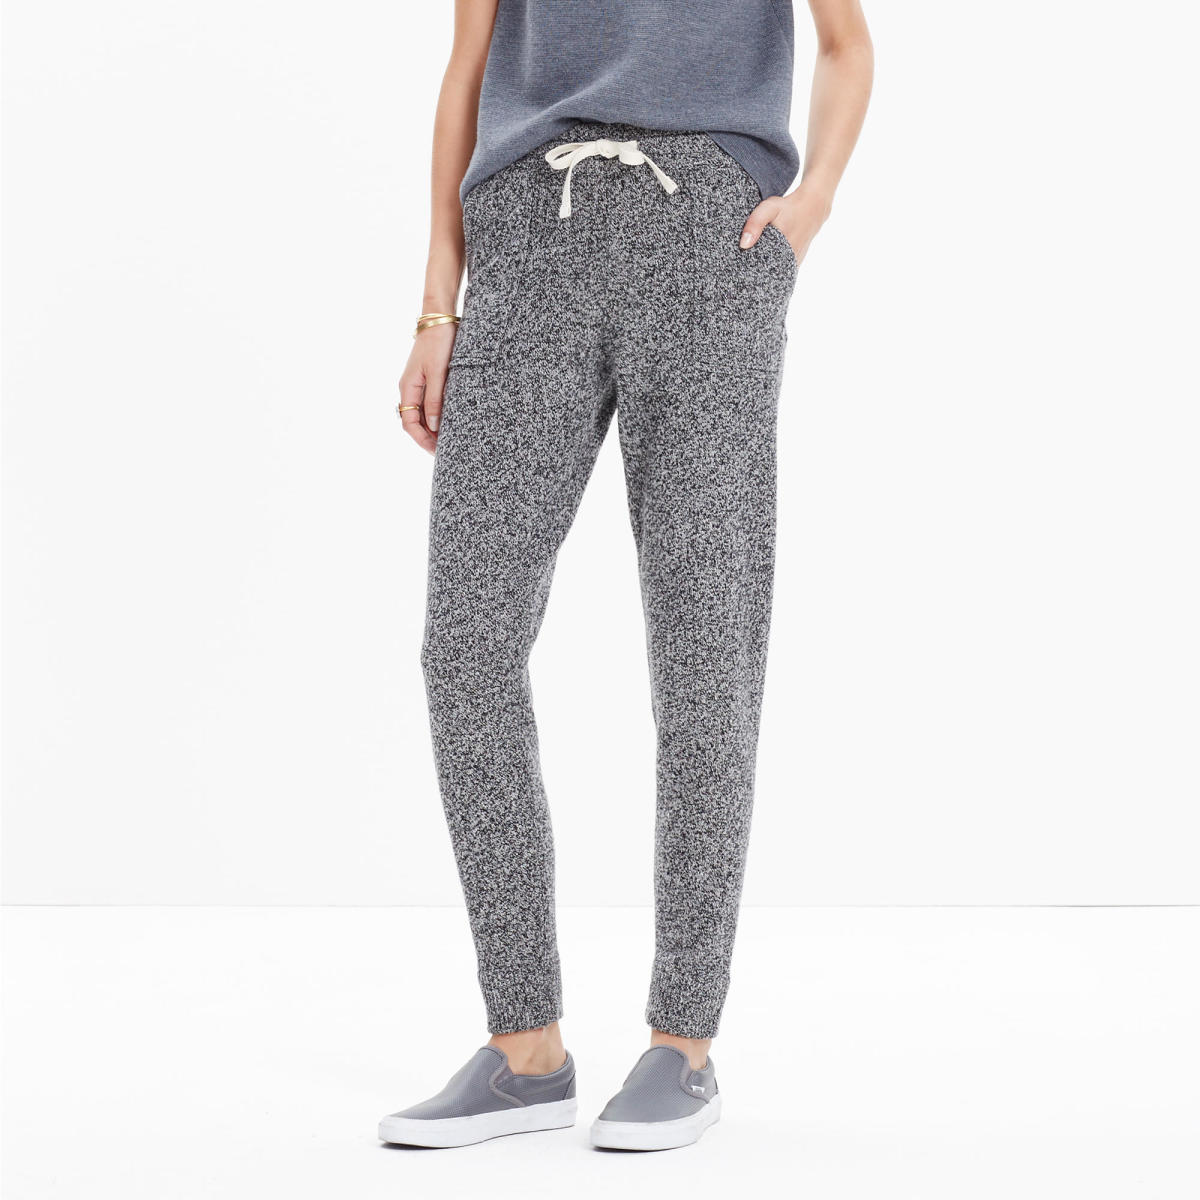 Madewell sweater pants, $98, available at Madewell.com.